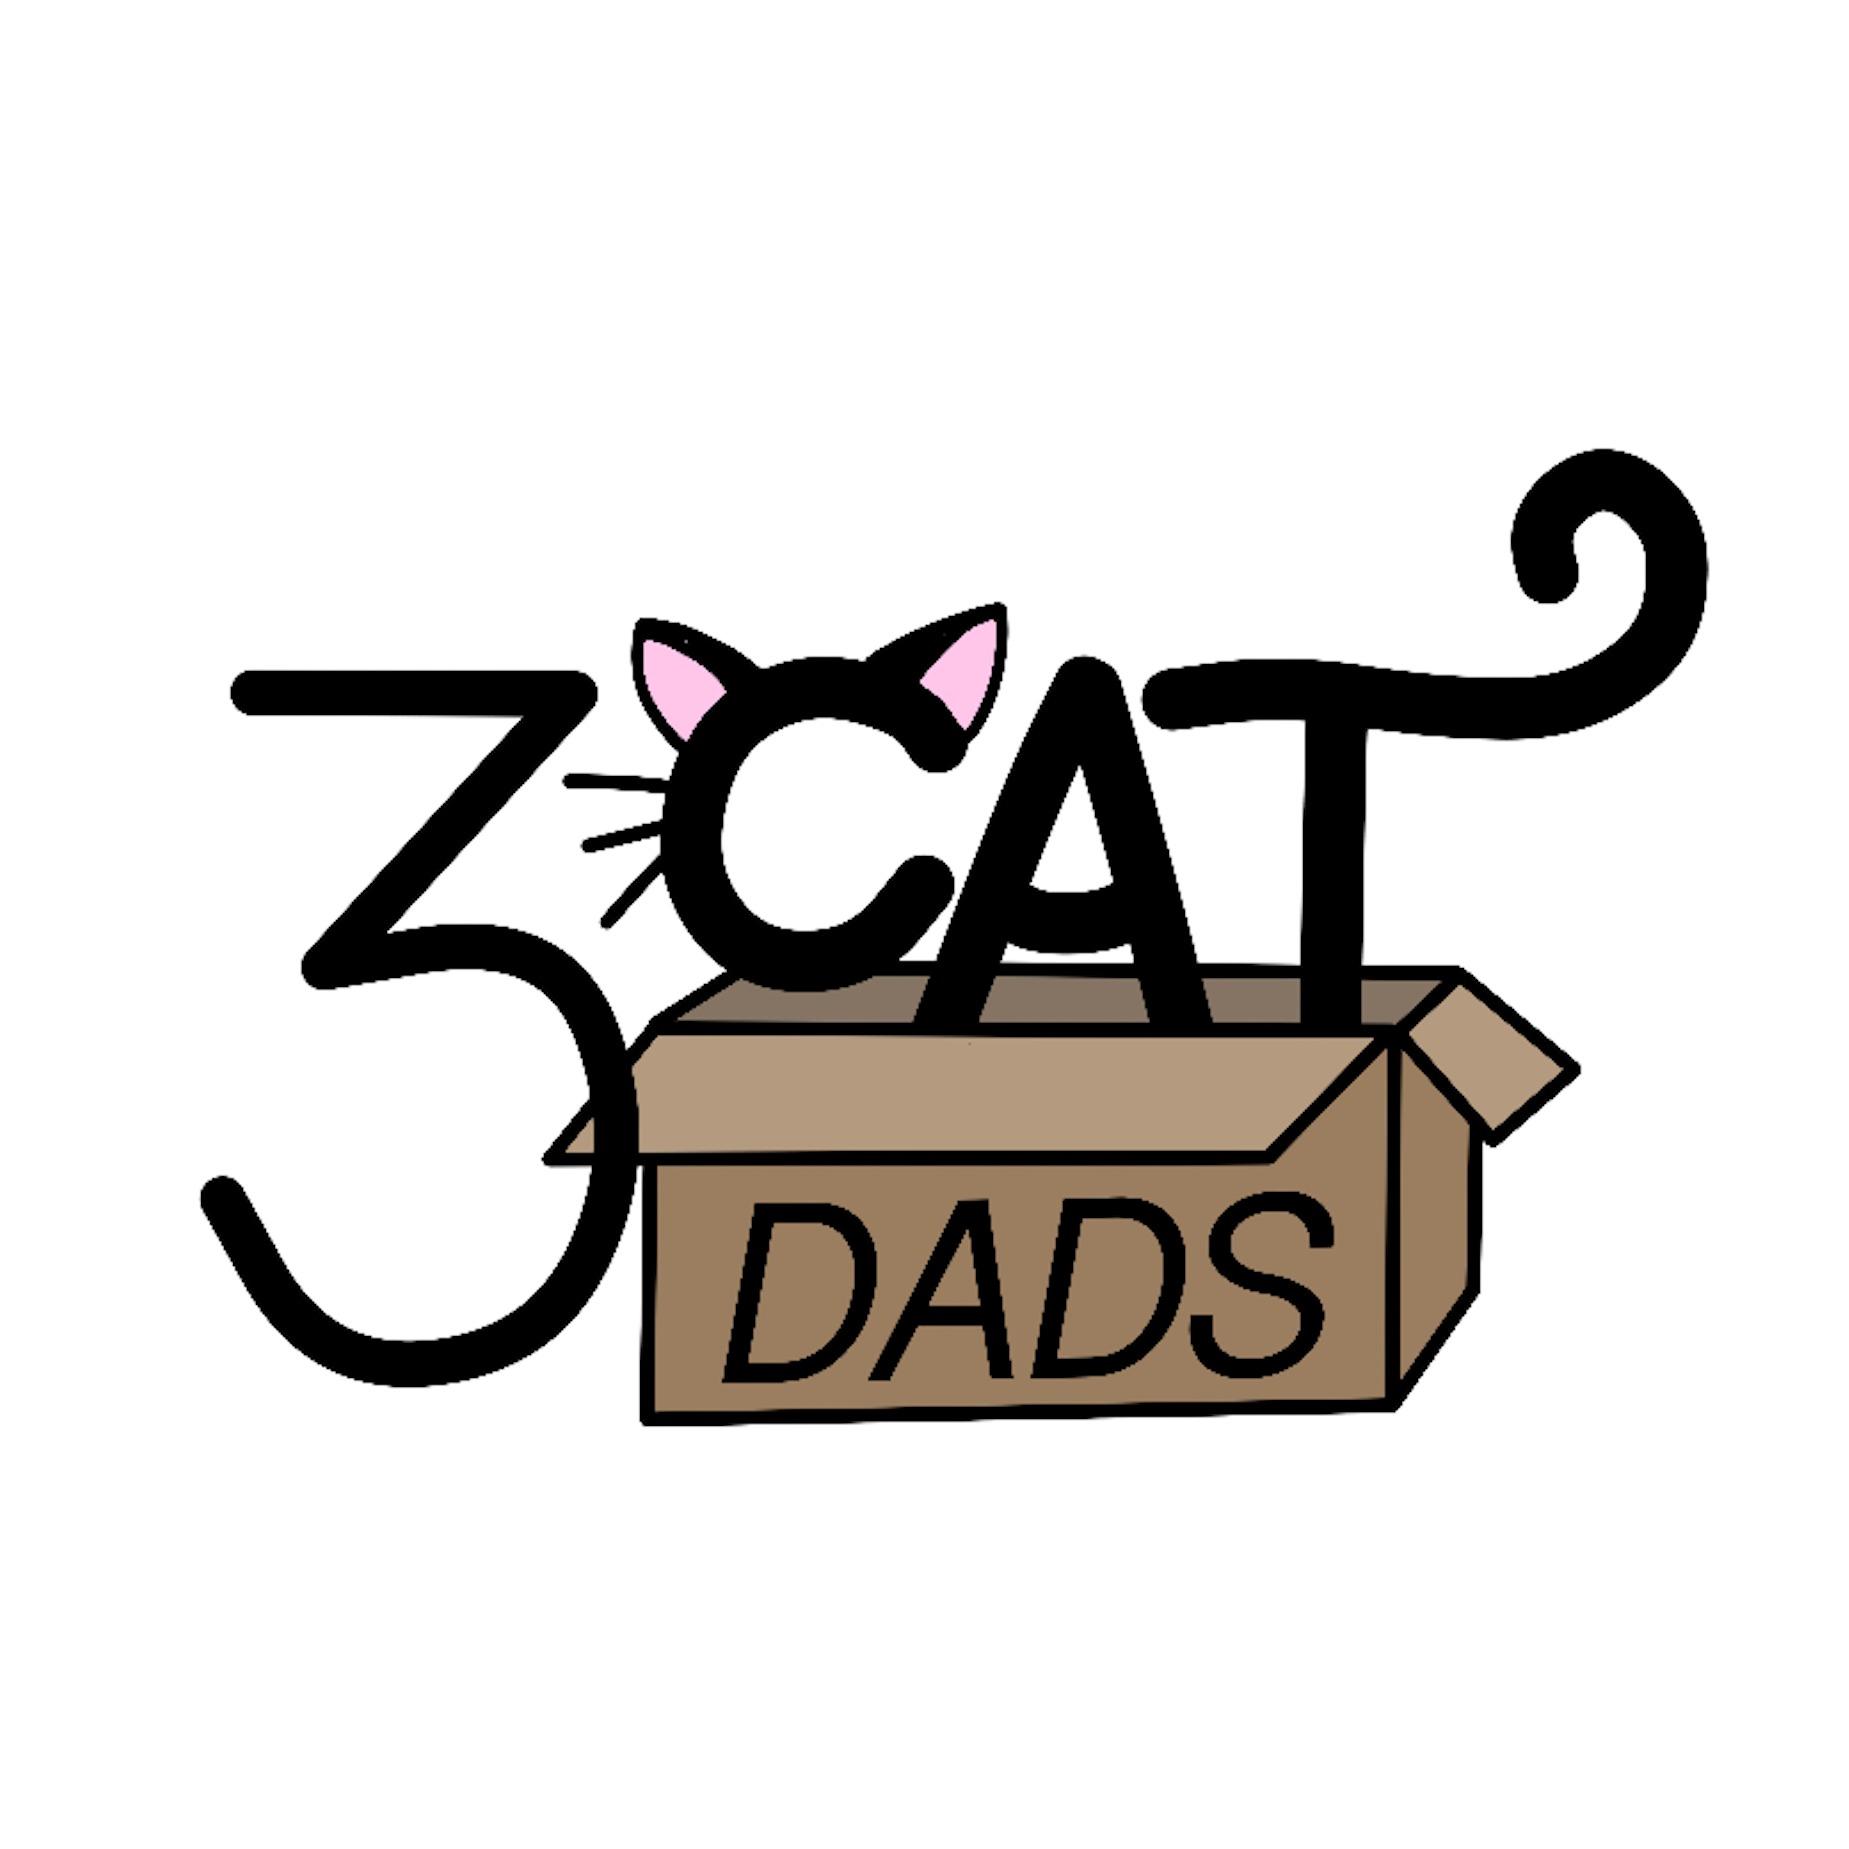 3 Cat Dads